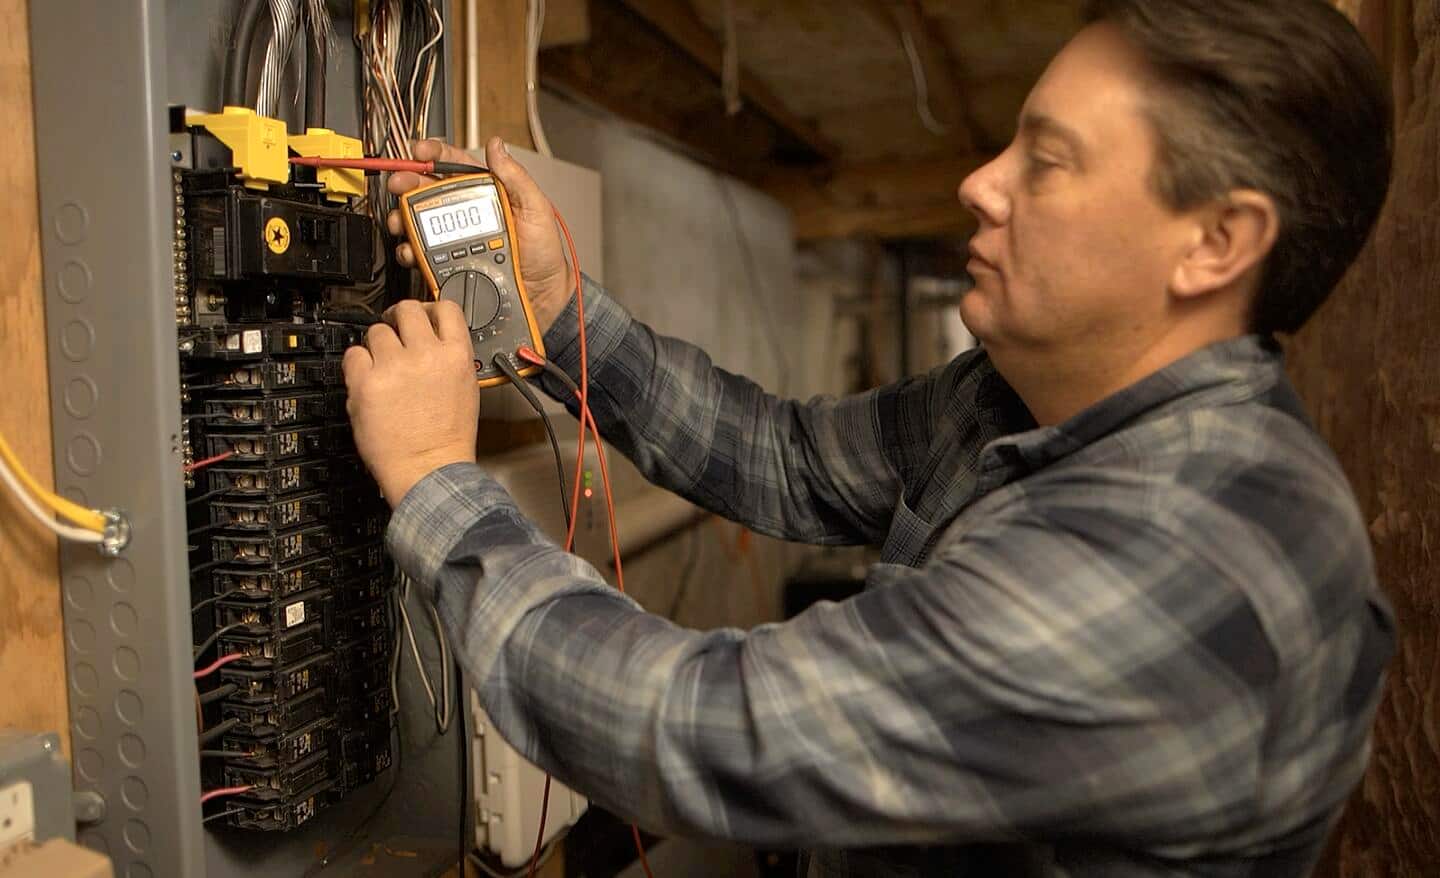 A person tests the voltage of a circuit breaker with a multimeter.